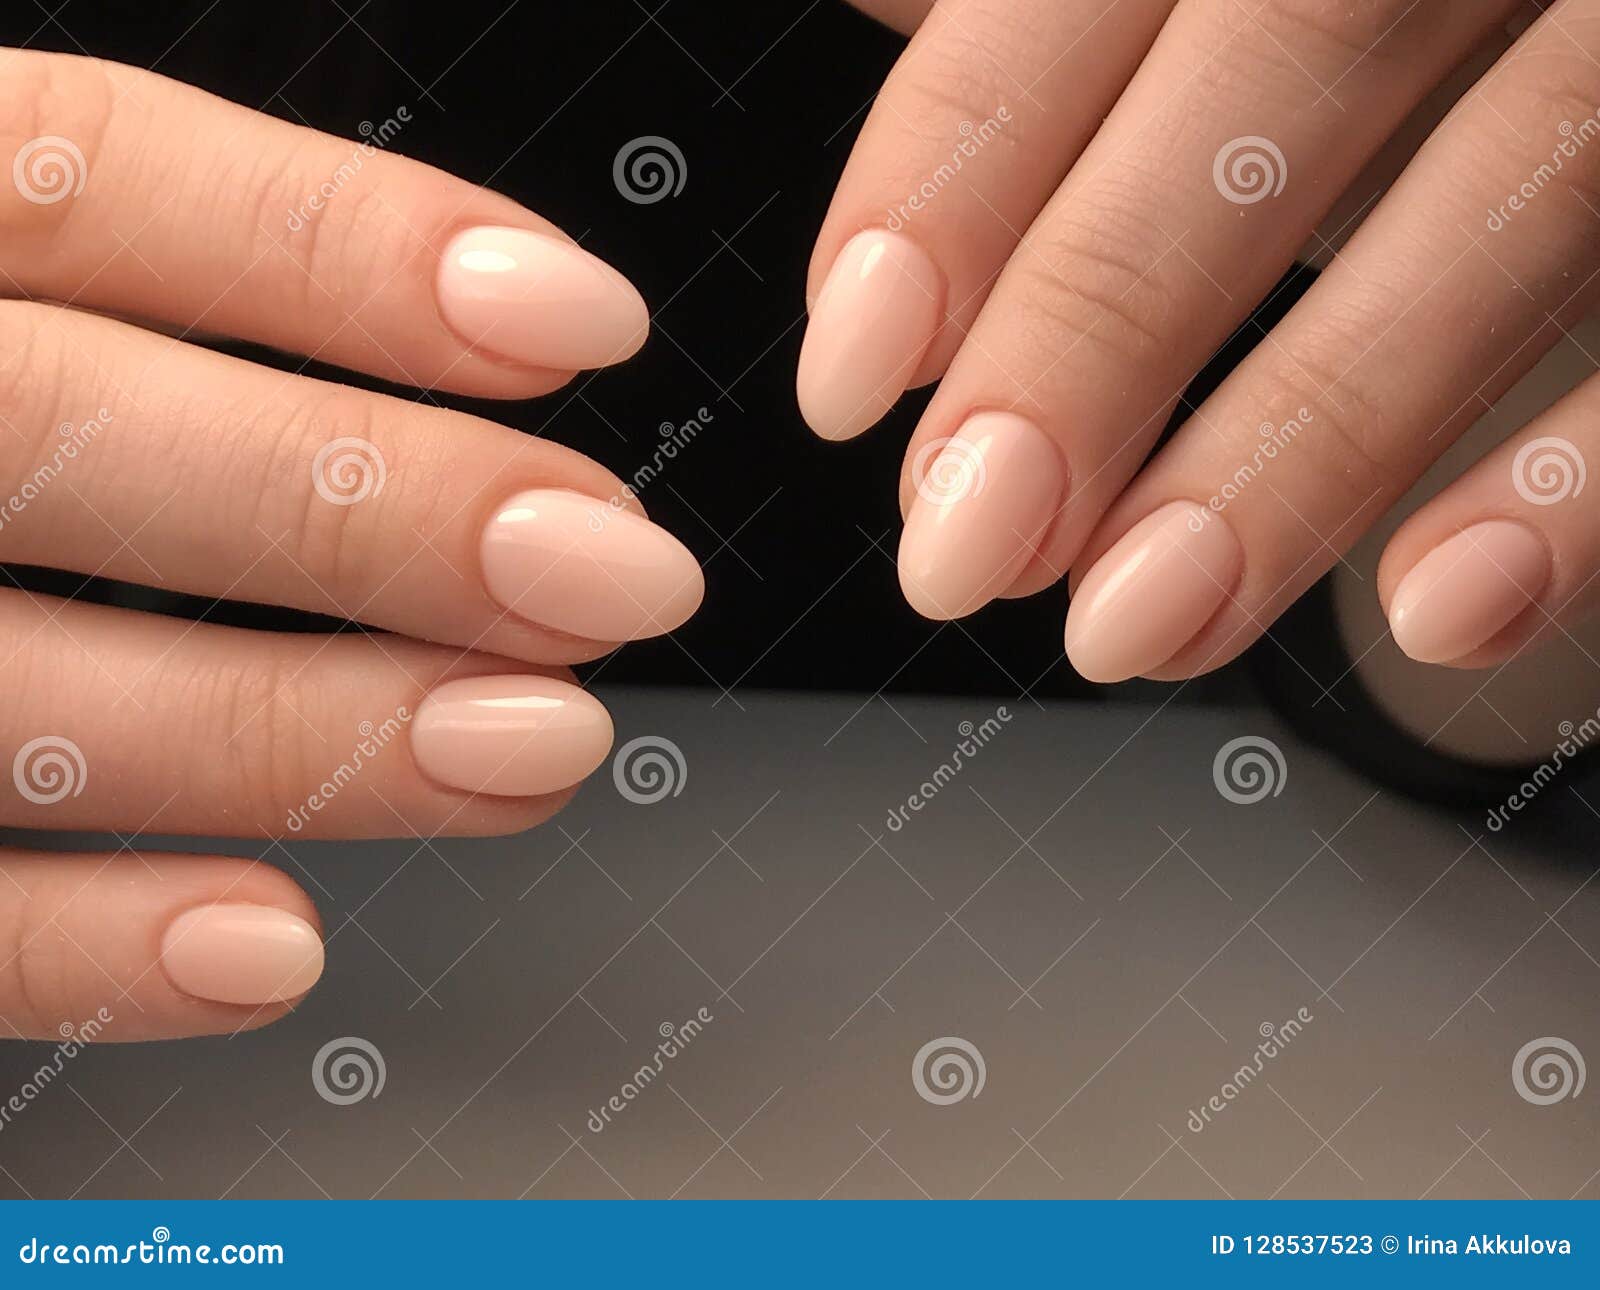 Manicure Gel Polish Nude Nails Stock Image - Image Of Nude, Hands: 128537523